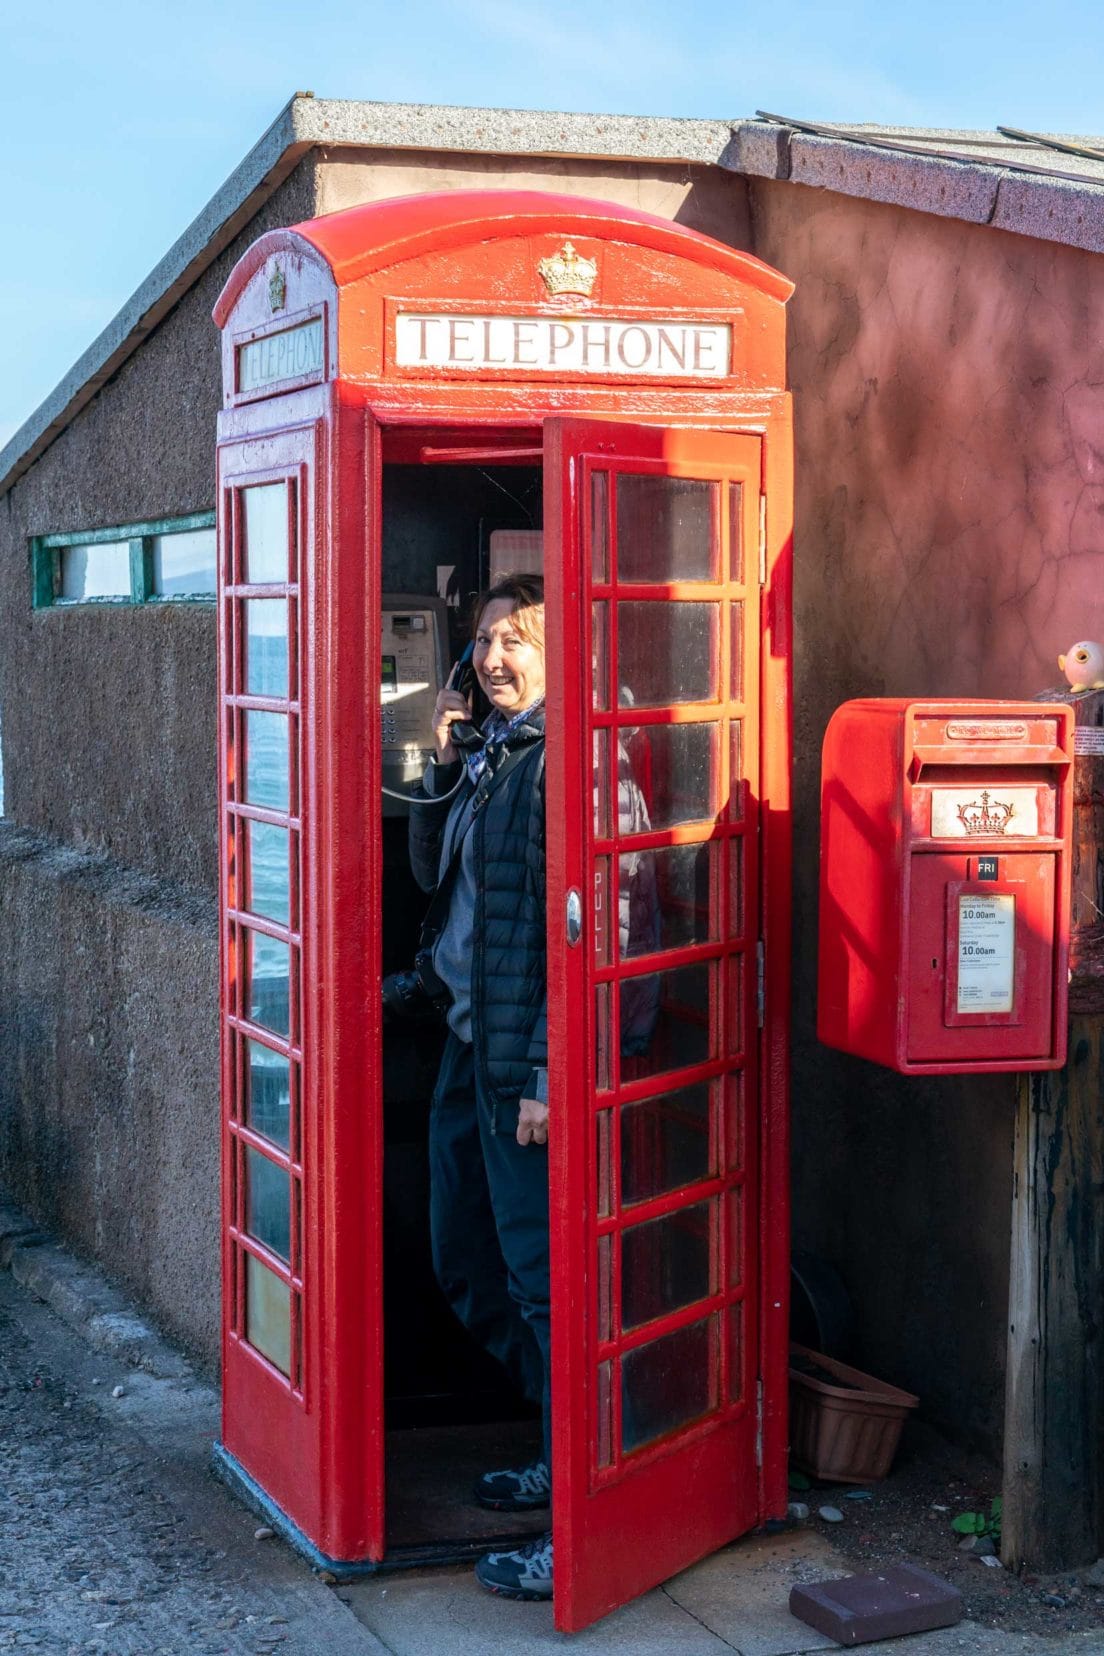 Pennan's-famous-red-telephone-box